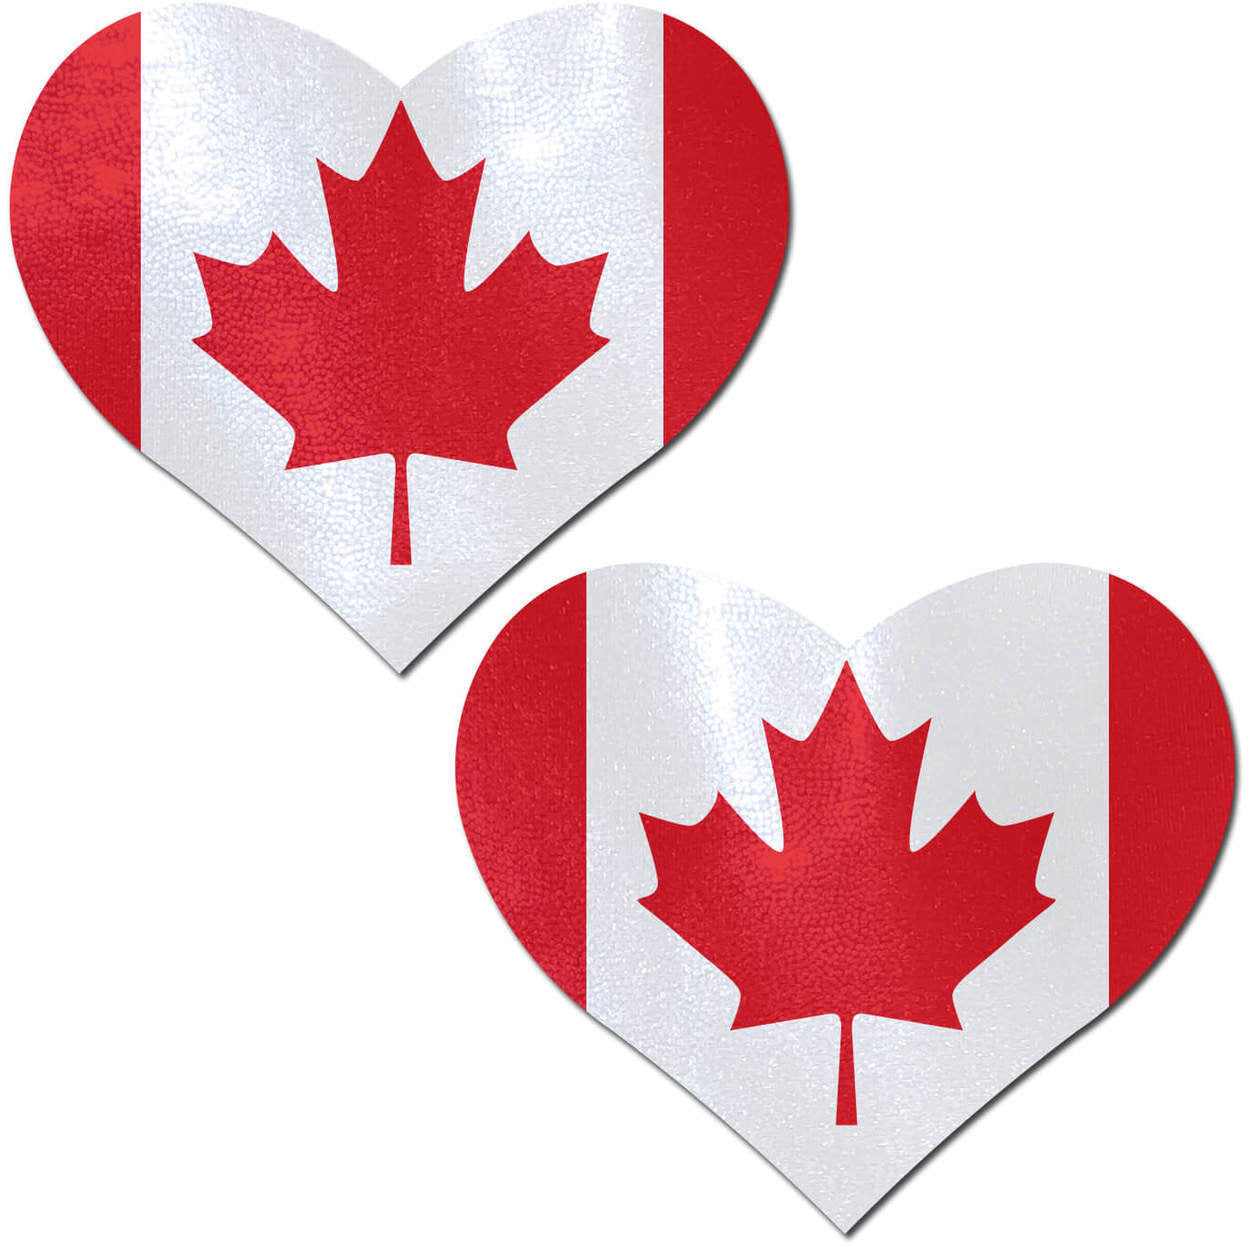 Festive Canadian Flag Pasties by Pastease